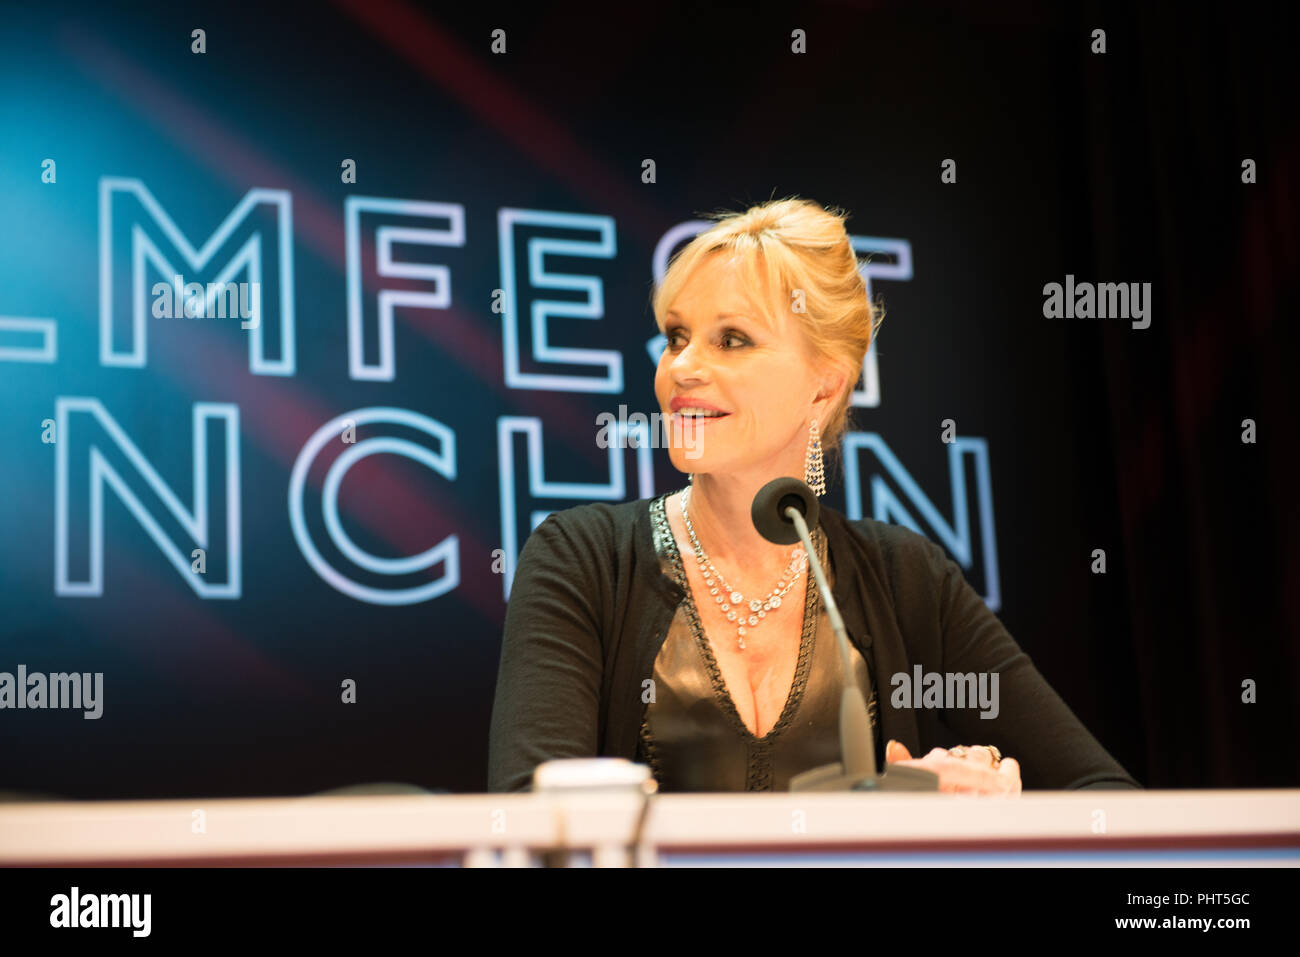 Actress Melanie Griffith attends a panel discussion at Filmfest München 2012 Stock Photo